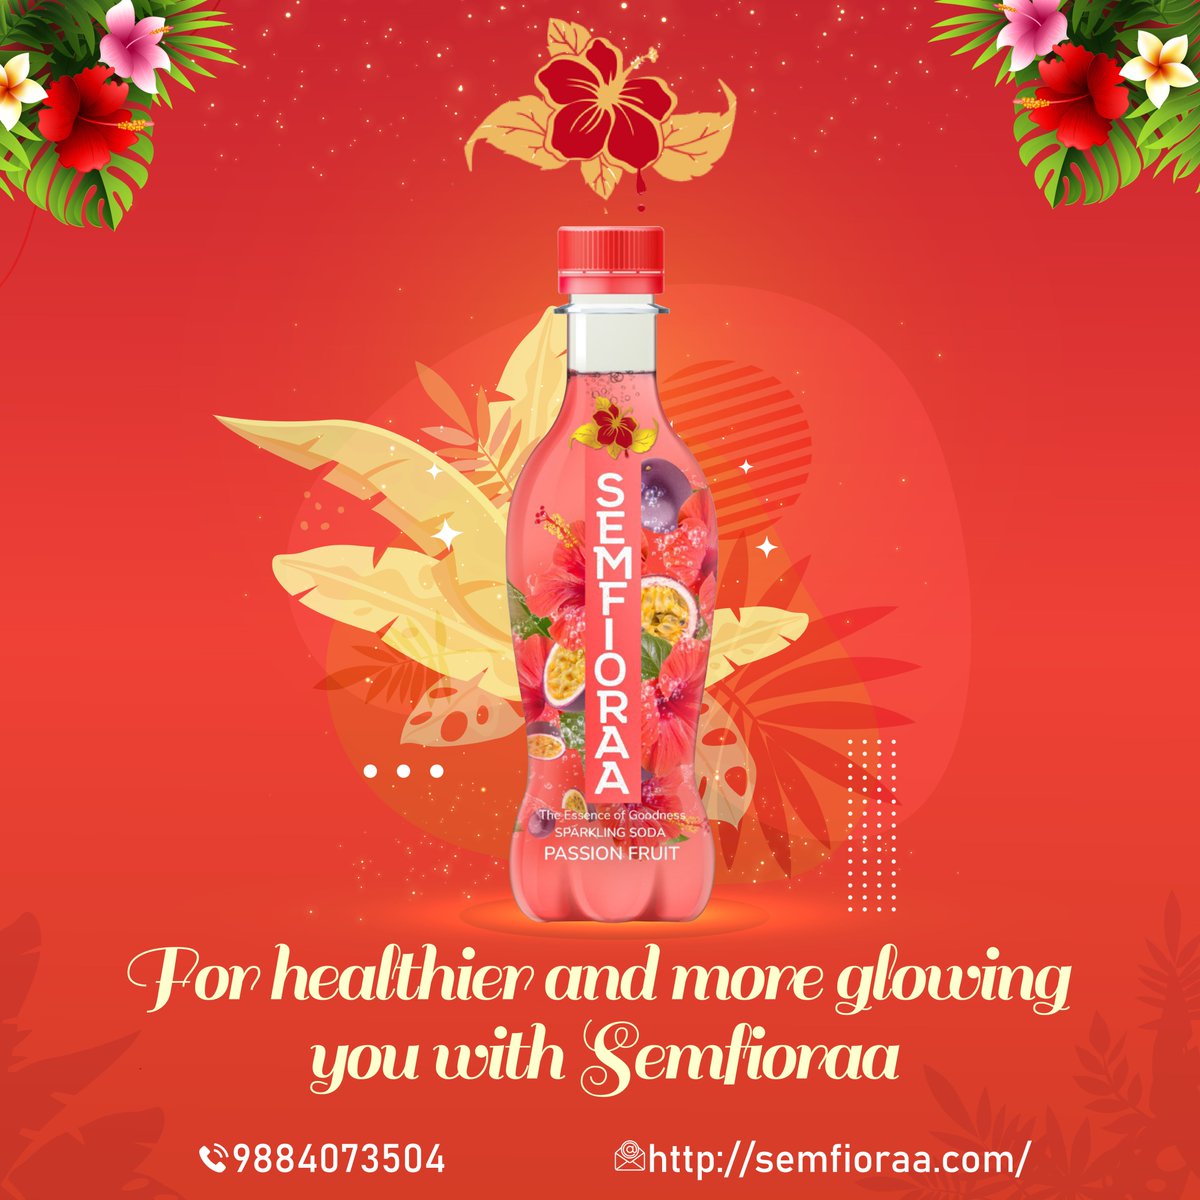 For healthier and more glowing you with #semfioraa
semfioraa.com | 9884073504
#floralcooldrink #hibiscusdrink #floraldrinks #Puducherry #healthy #juicecleanse #healthydrinks #healthyliving #drinkspecials #drinkswithfriends #drinkresponsibly #drinklocally #cooldrinks